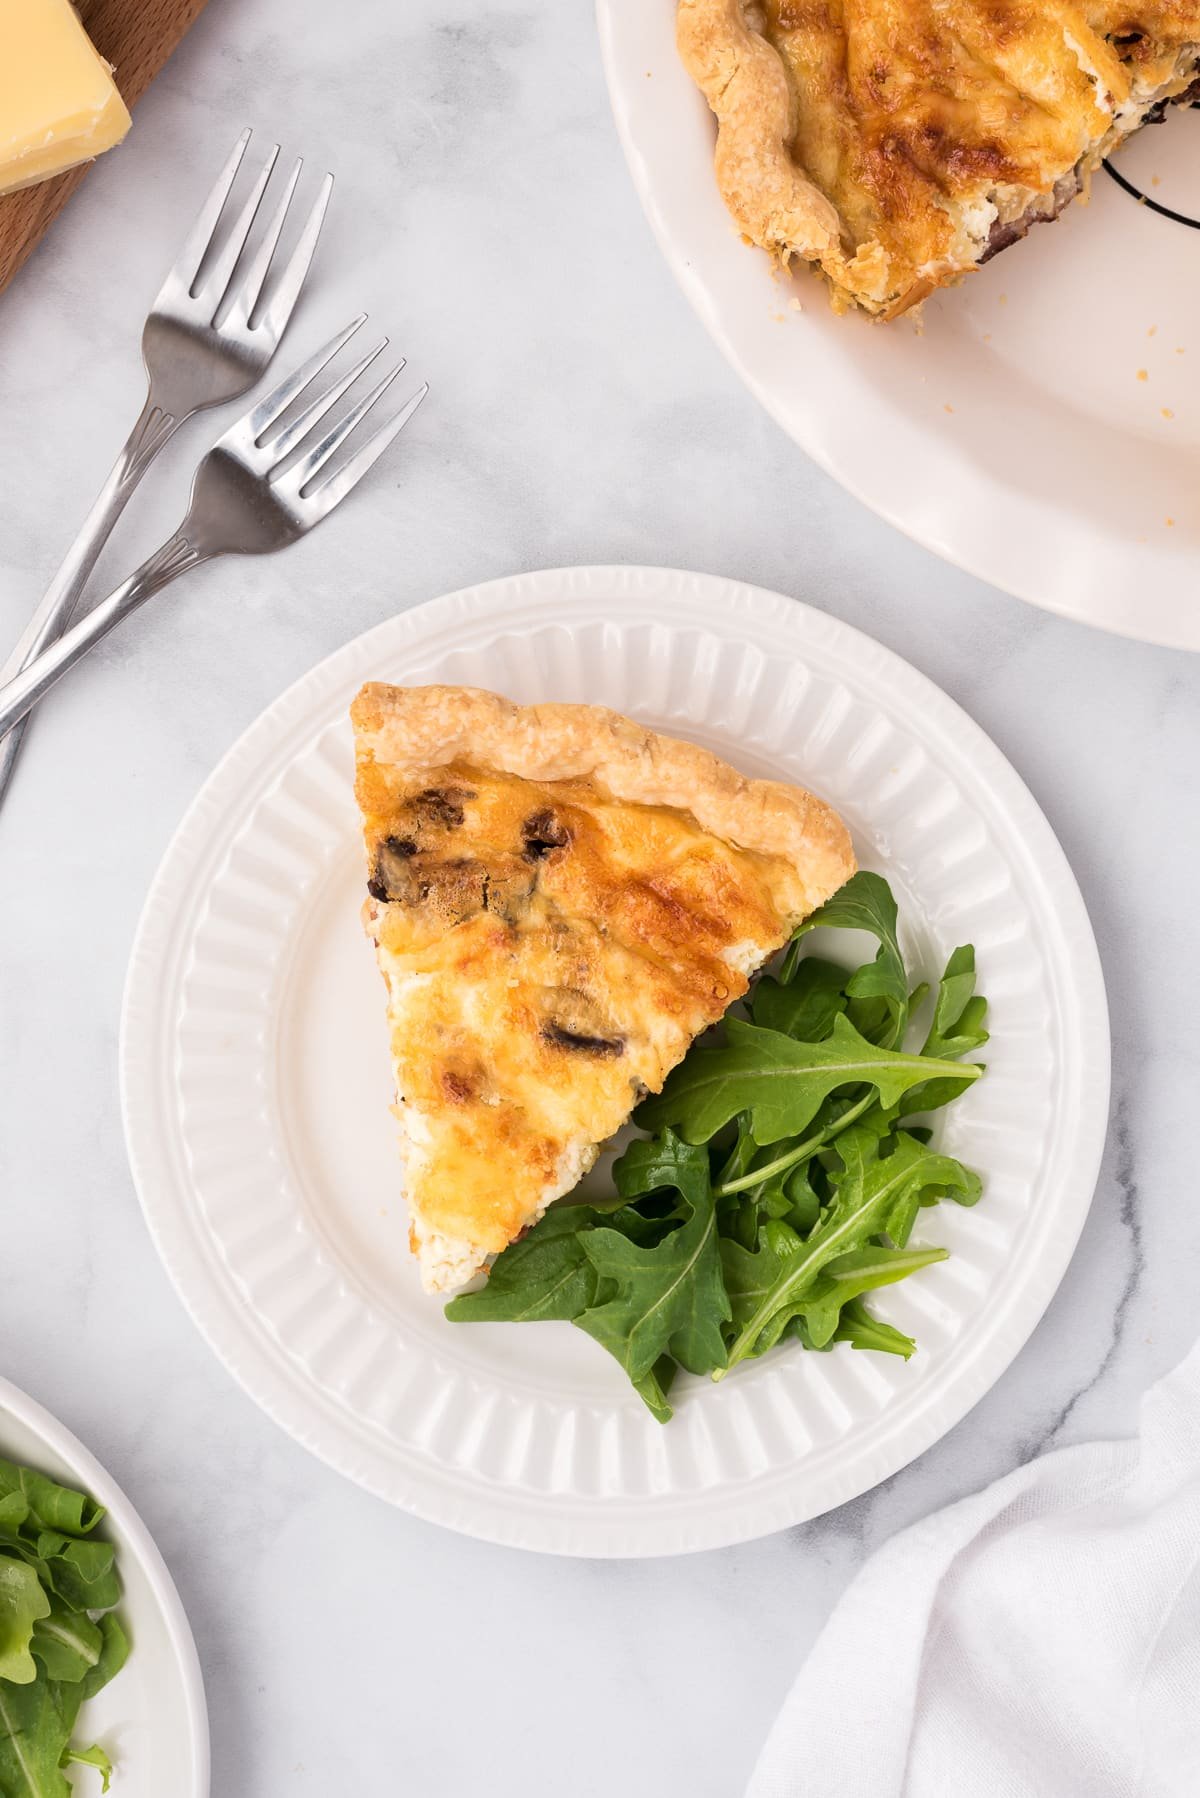 Slice of quiche served with a side of fresh greens on a white serving plate.